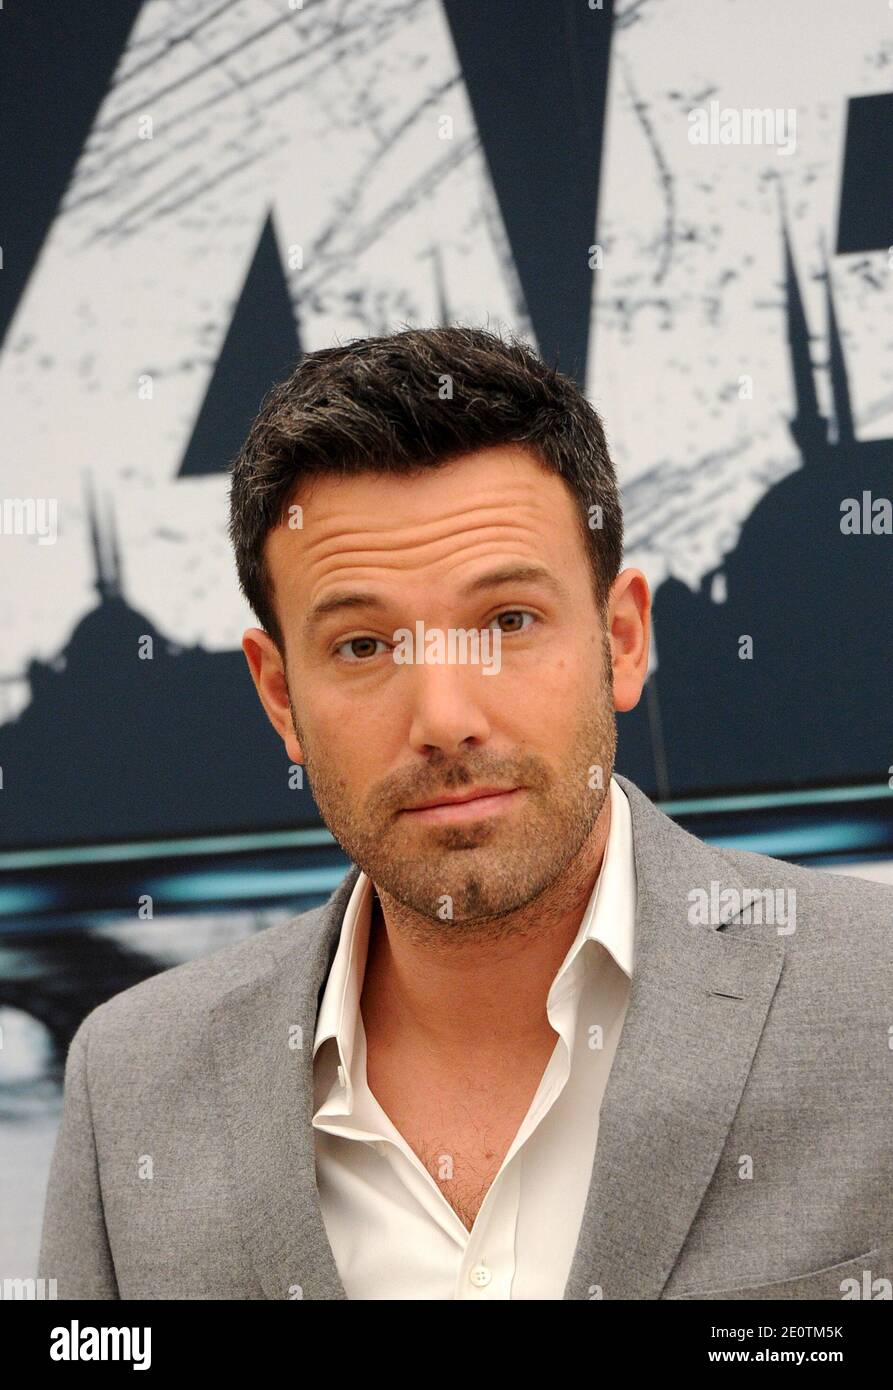 US actor and film director Ben Affleck poses during the photocall of his last movie 'Argo' on October 19, 2012 in Rome, Italy. The film is based on the historical rescue of US diplomats from Tehran during the Iran hostage crisis in 1979 with Ben Affleck directing and playing. Photo by Eric Vandeville/ABACAPRESS.COM Stock Photo